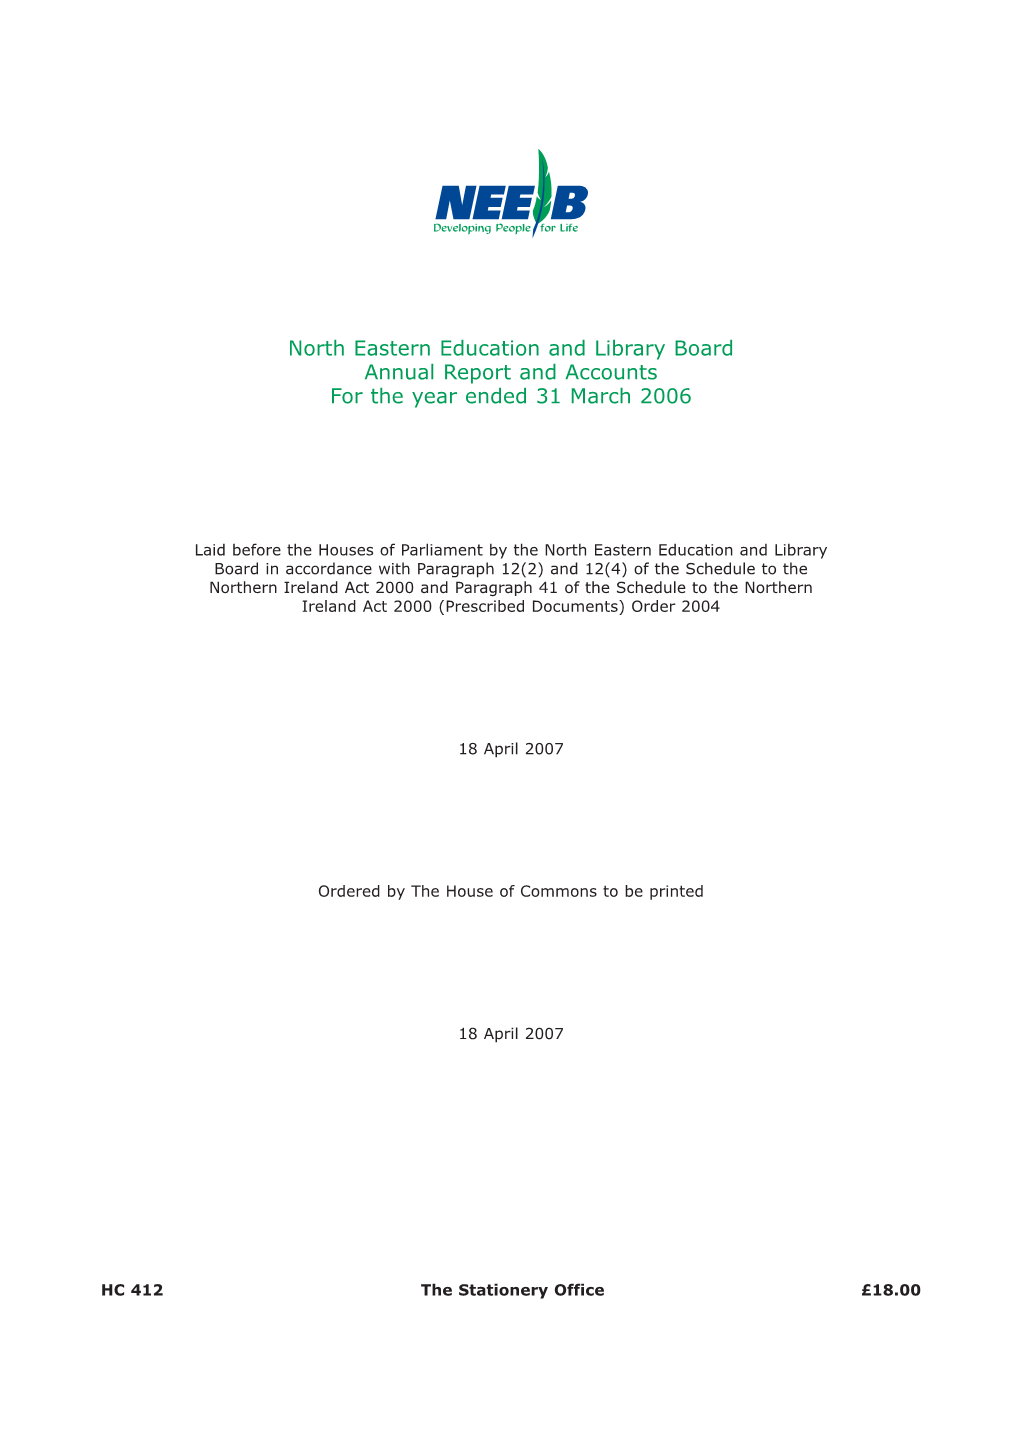 North Eastern Education and Library Board Annual Report and Accounts for the Year Ended 31 March 2006 HC